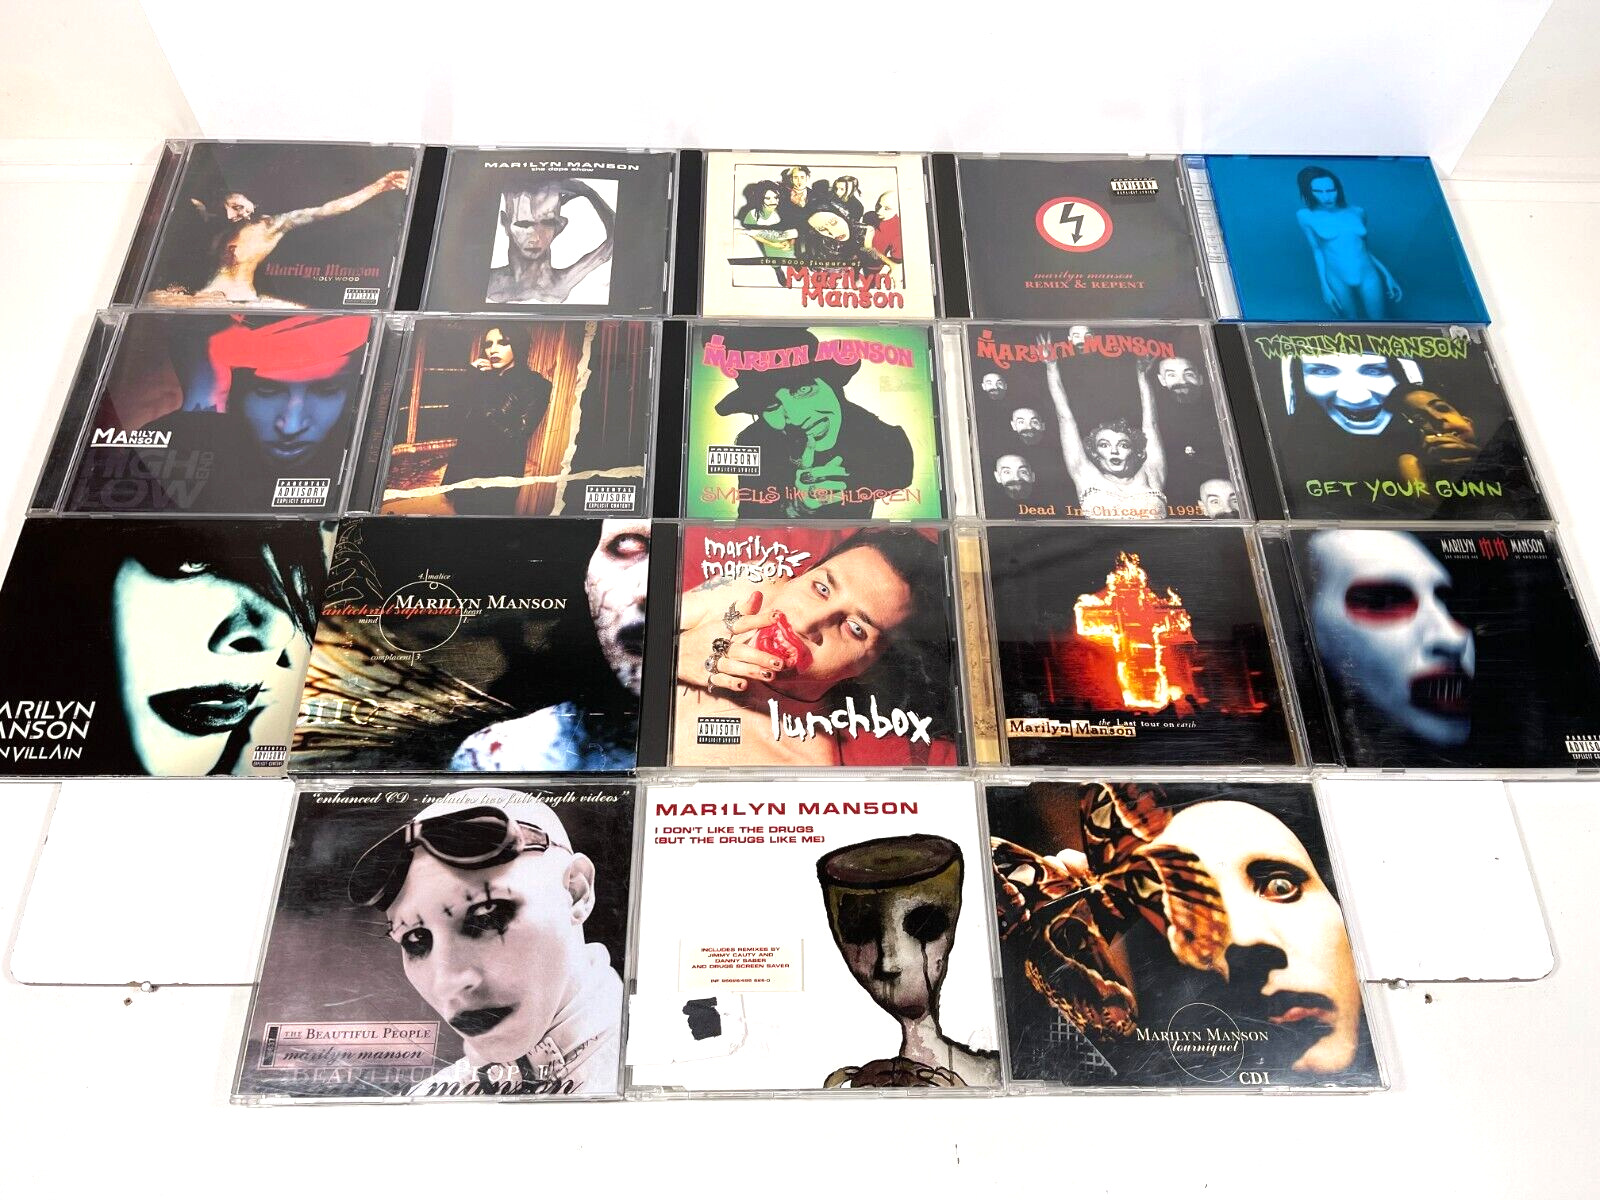 Lot of 18 Marilyn Manson Tourniquet Lunchbox Smells Like Children Holywood CDs